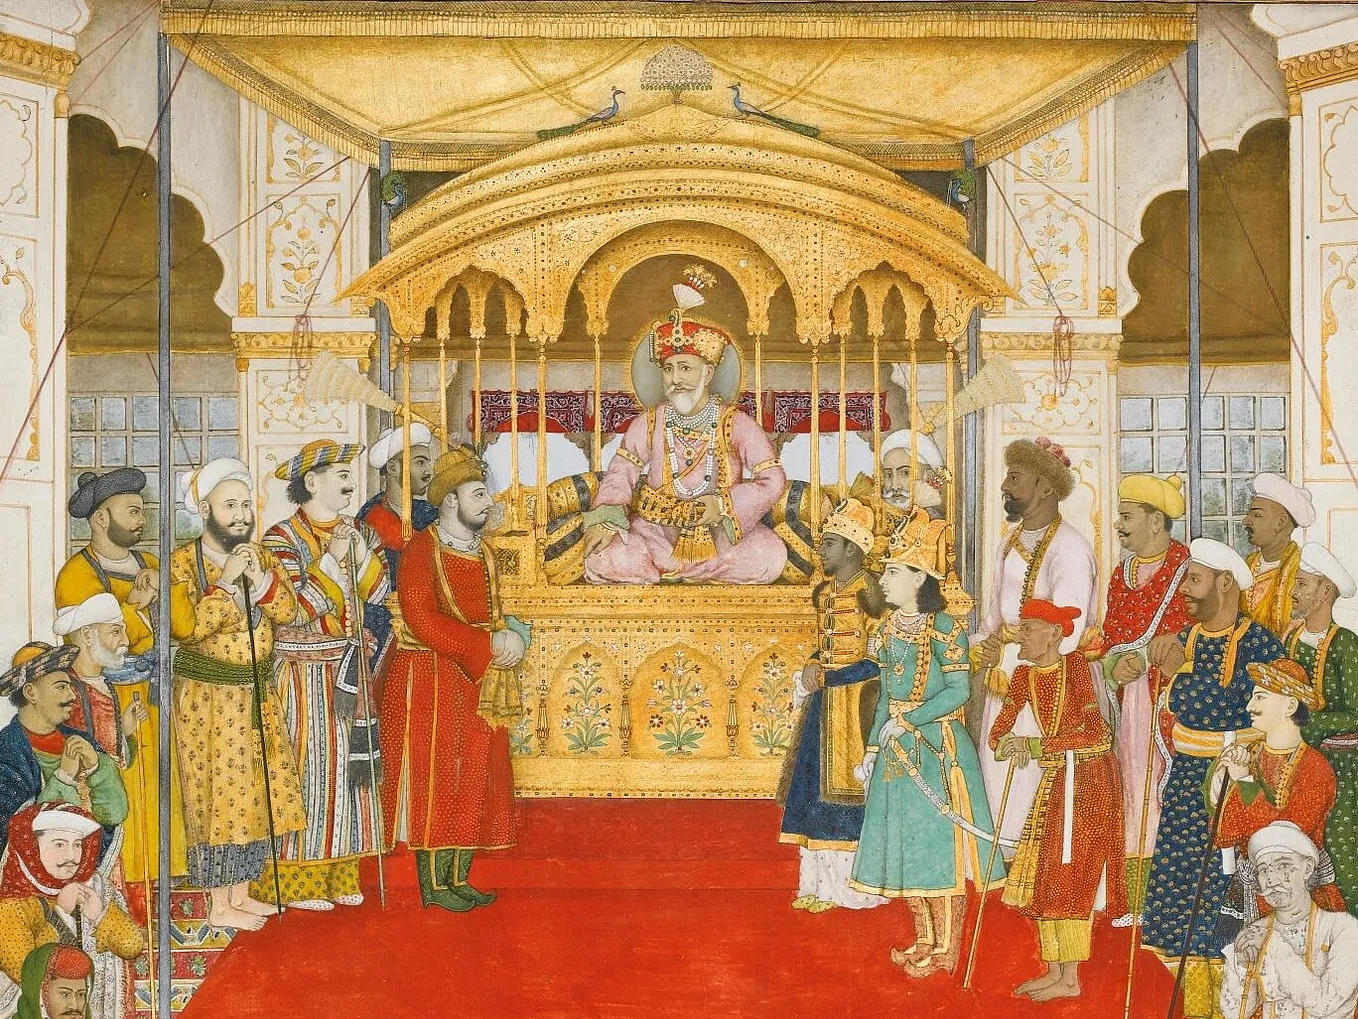 Why I Regard Mughal Emperor Akbar as the Father of the Indian Nation